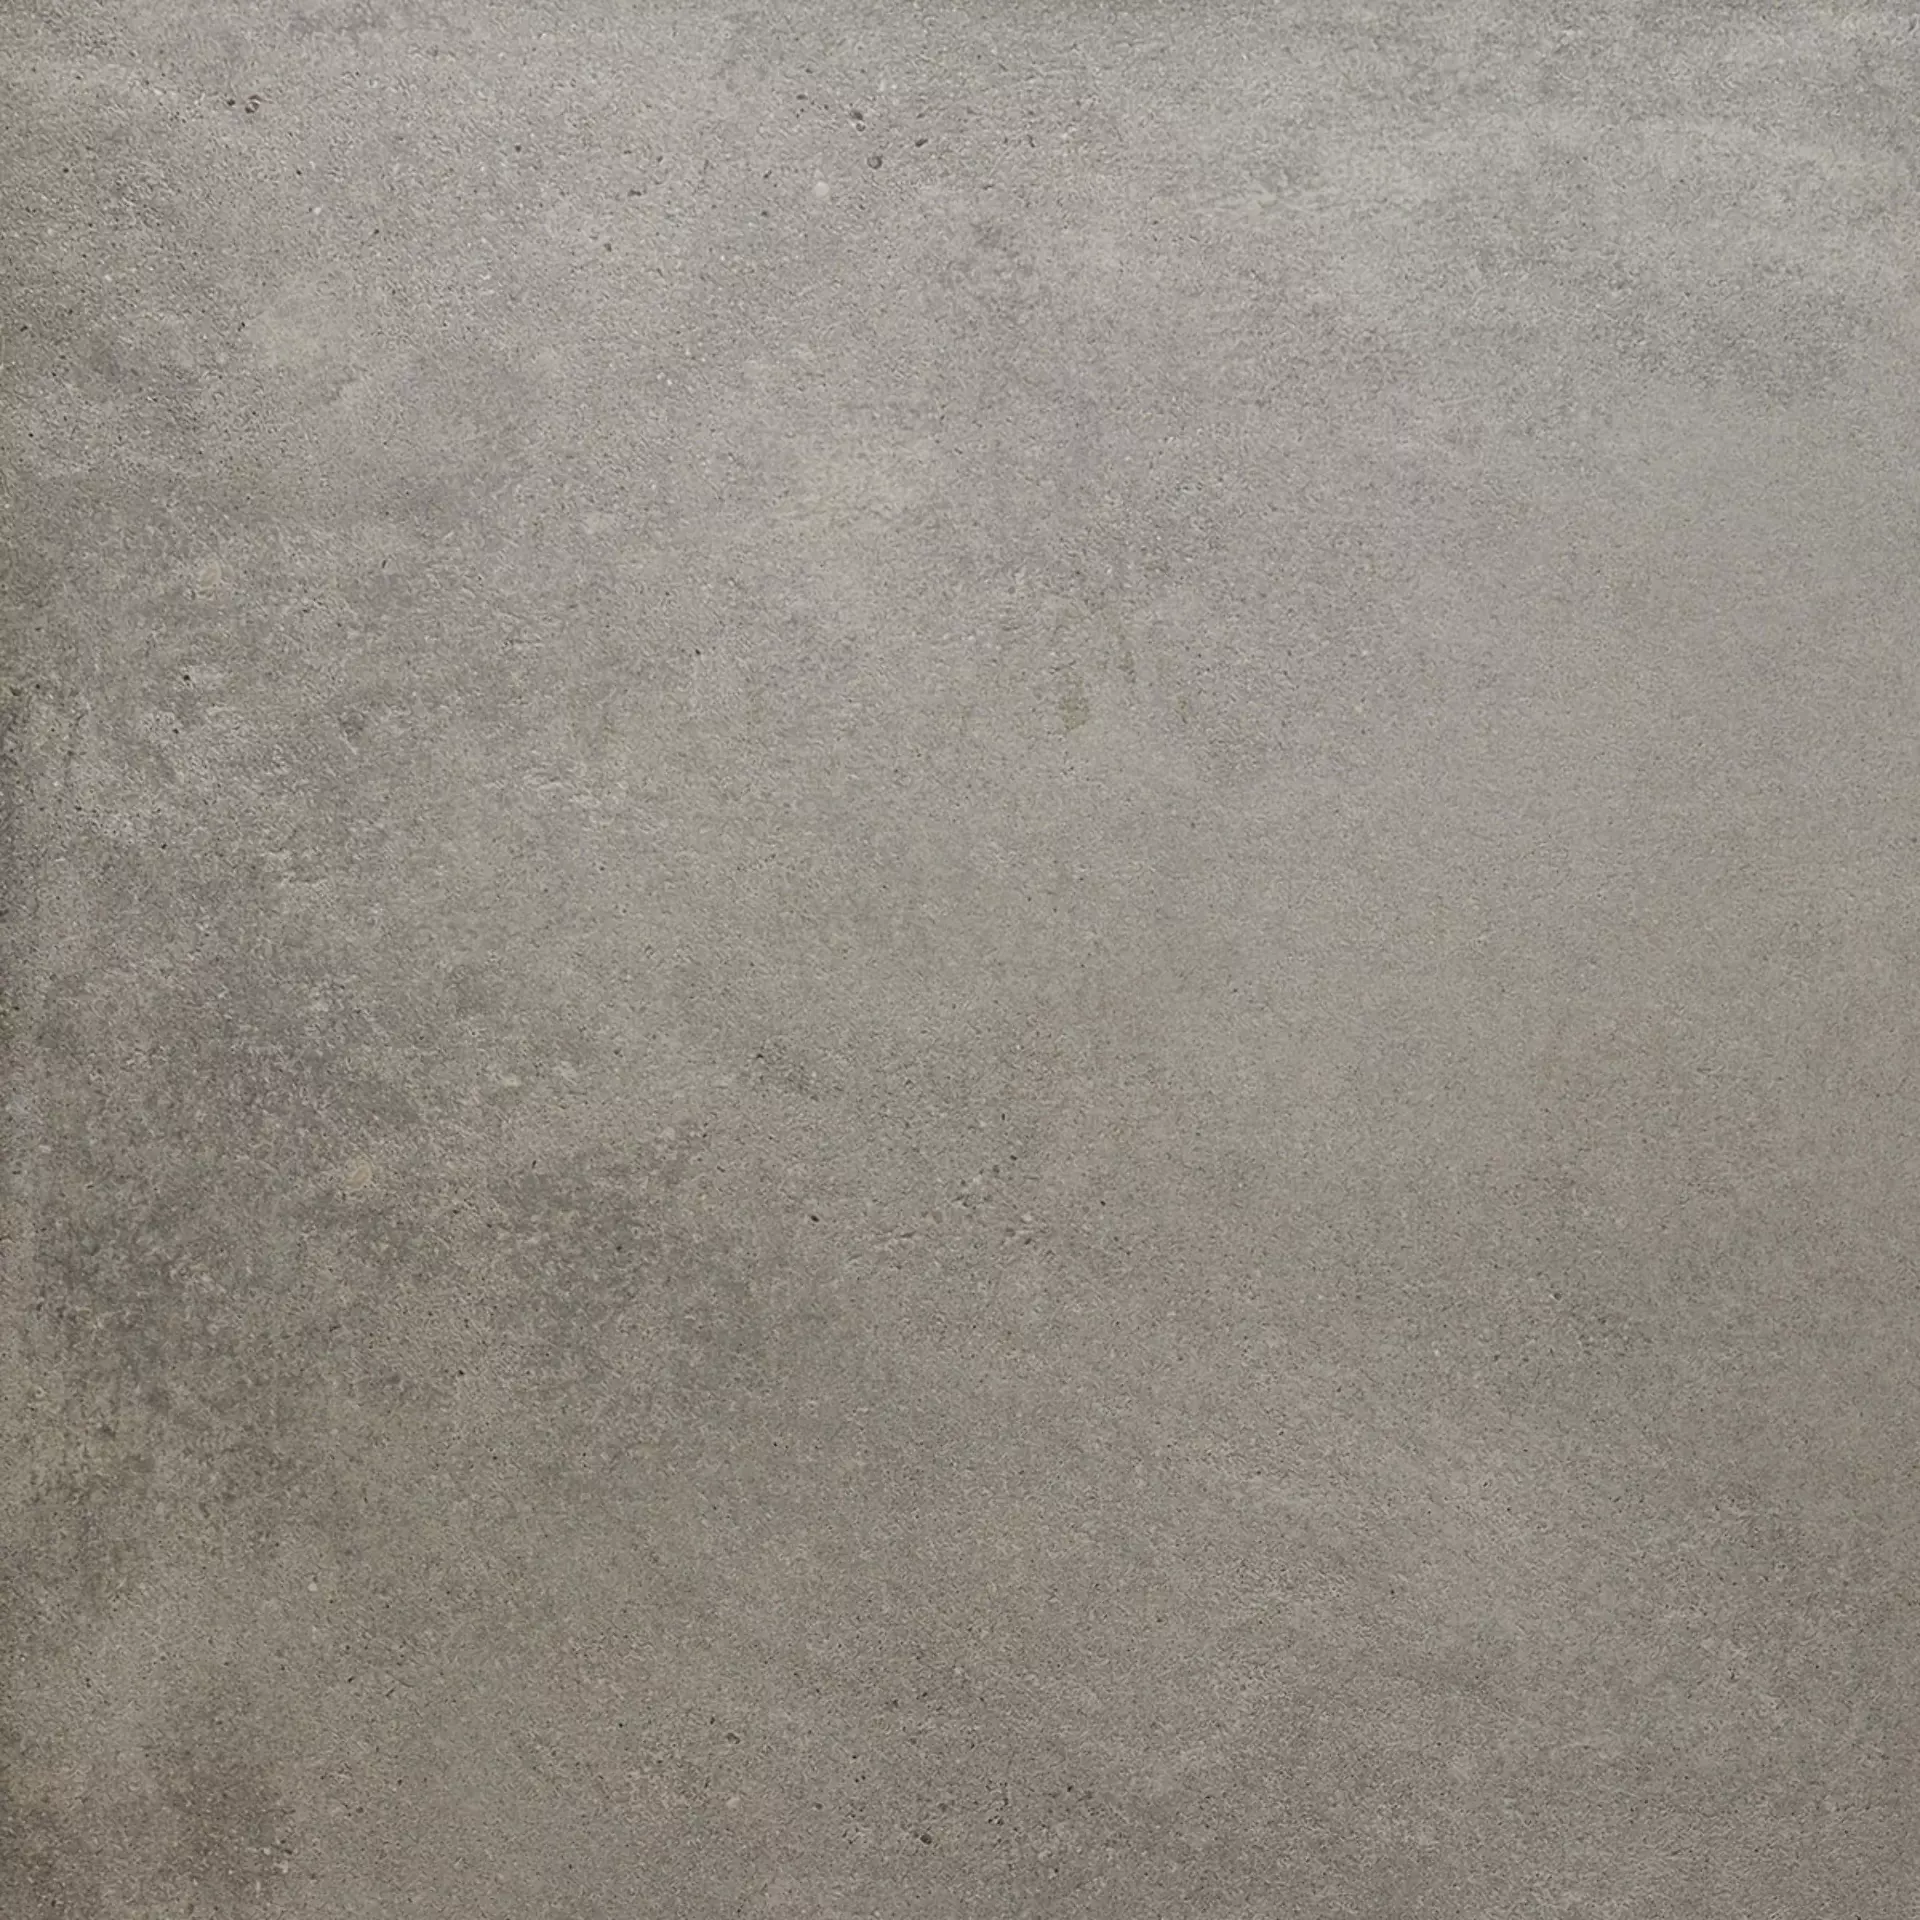 Rondine Loft Taupe Naturale J89069 80x80cm rectified 8,5mm